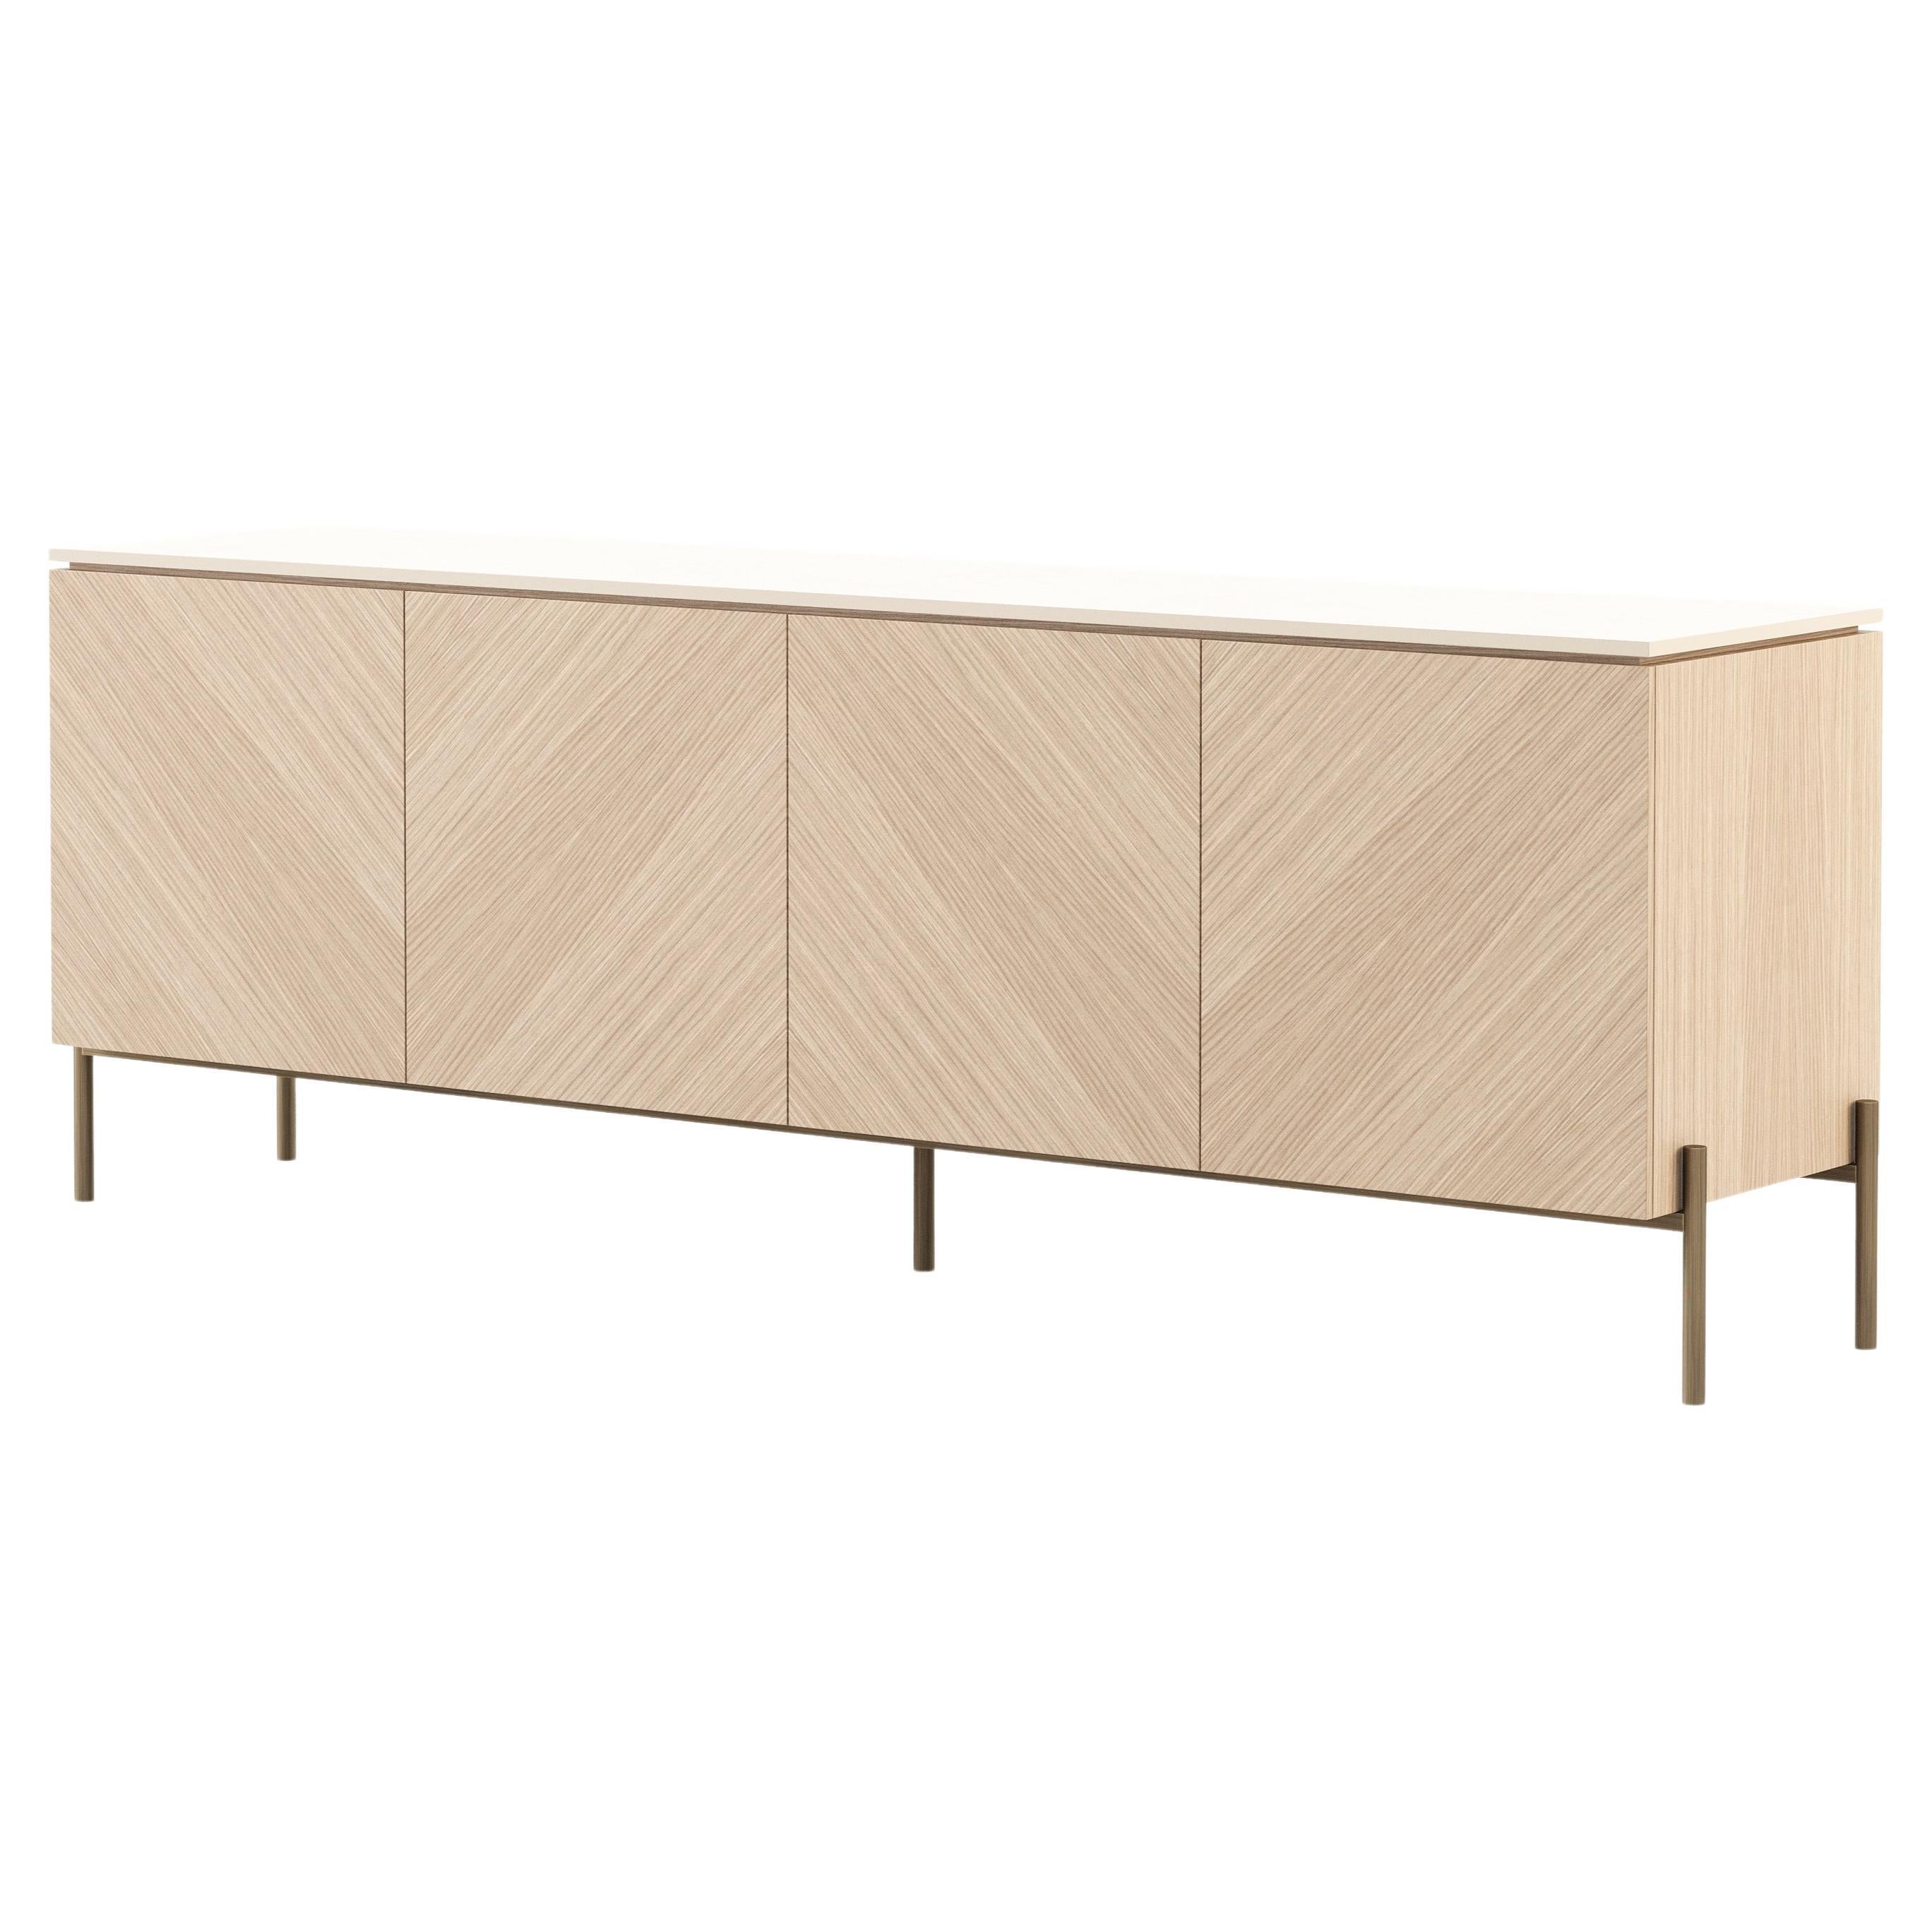 Organic Modern Ílhavo Sideboard Made with Oak and Iron, Handmade by Stylish Club